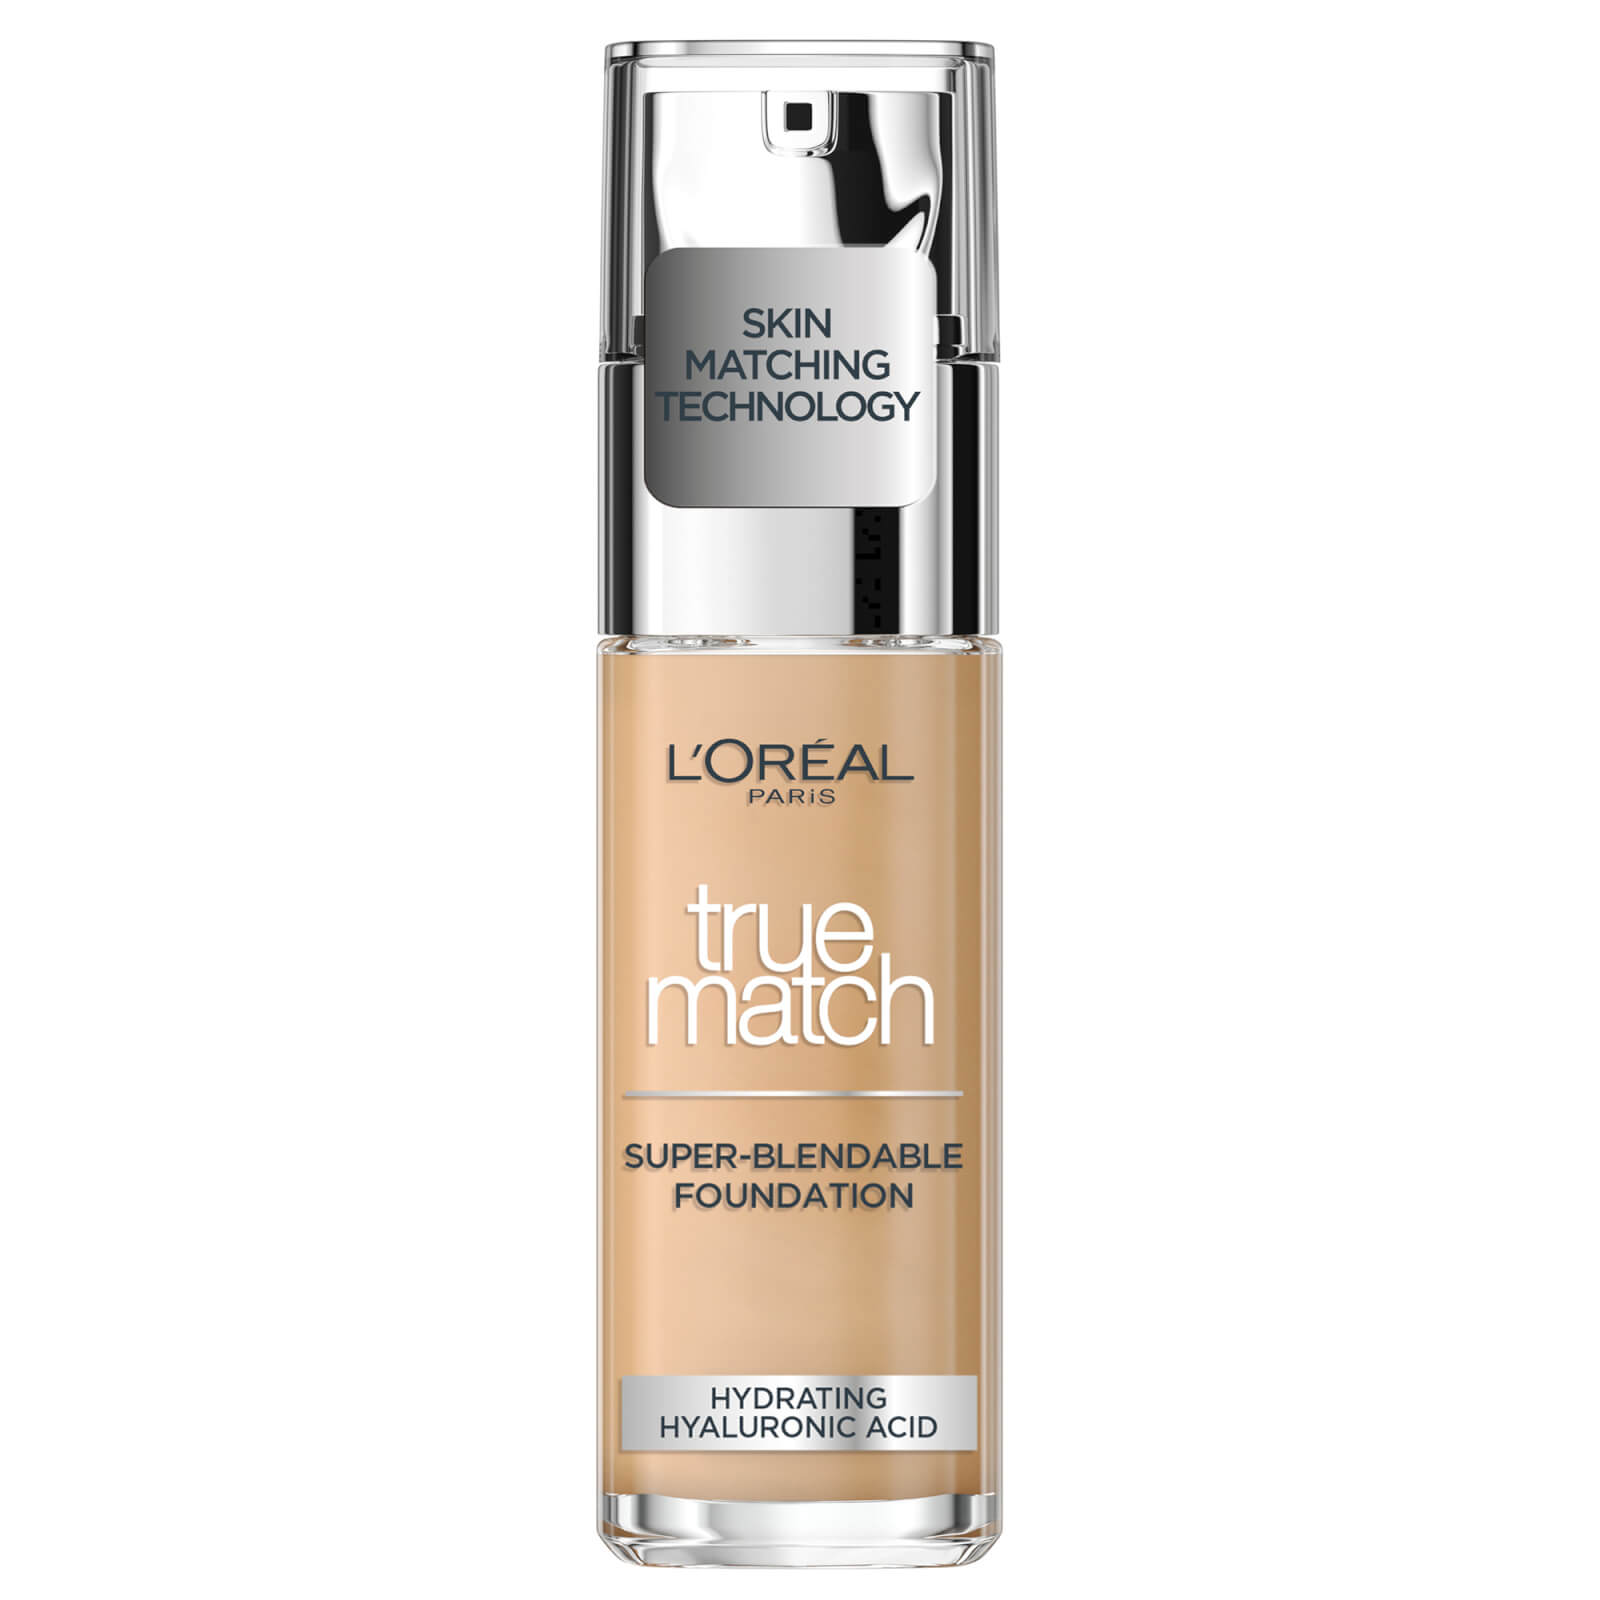 L'Oreal Paris True Match Liquid Foundation with SPF and Hyaluronic Acid 30ml (Various Shades) - 5C R